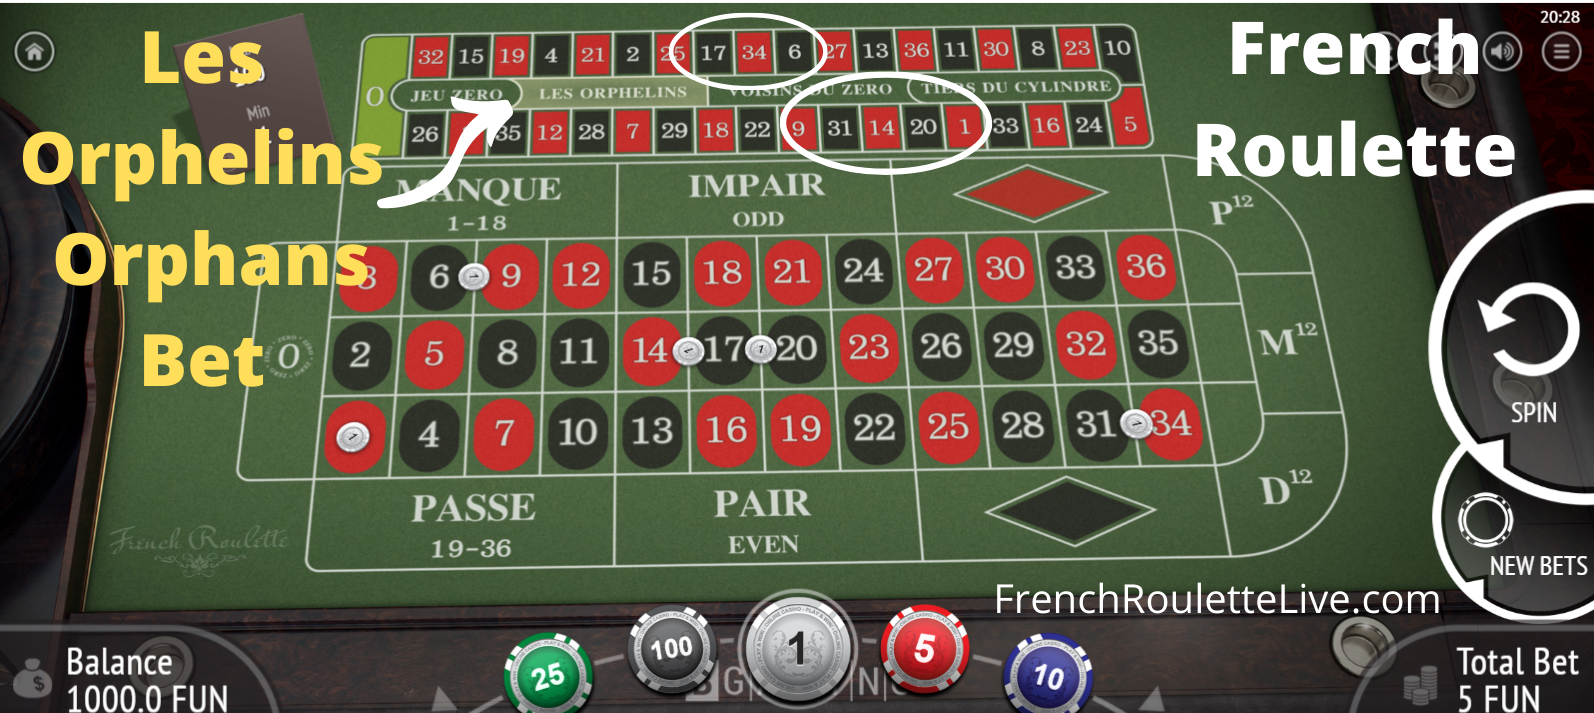 French Roulette Table Layouts - Les Orphelins Special Bet - Racetrack